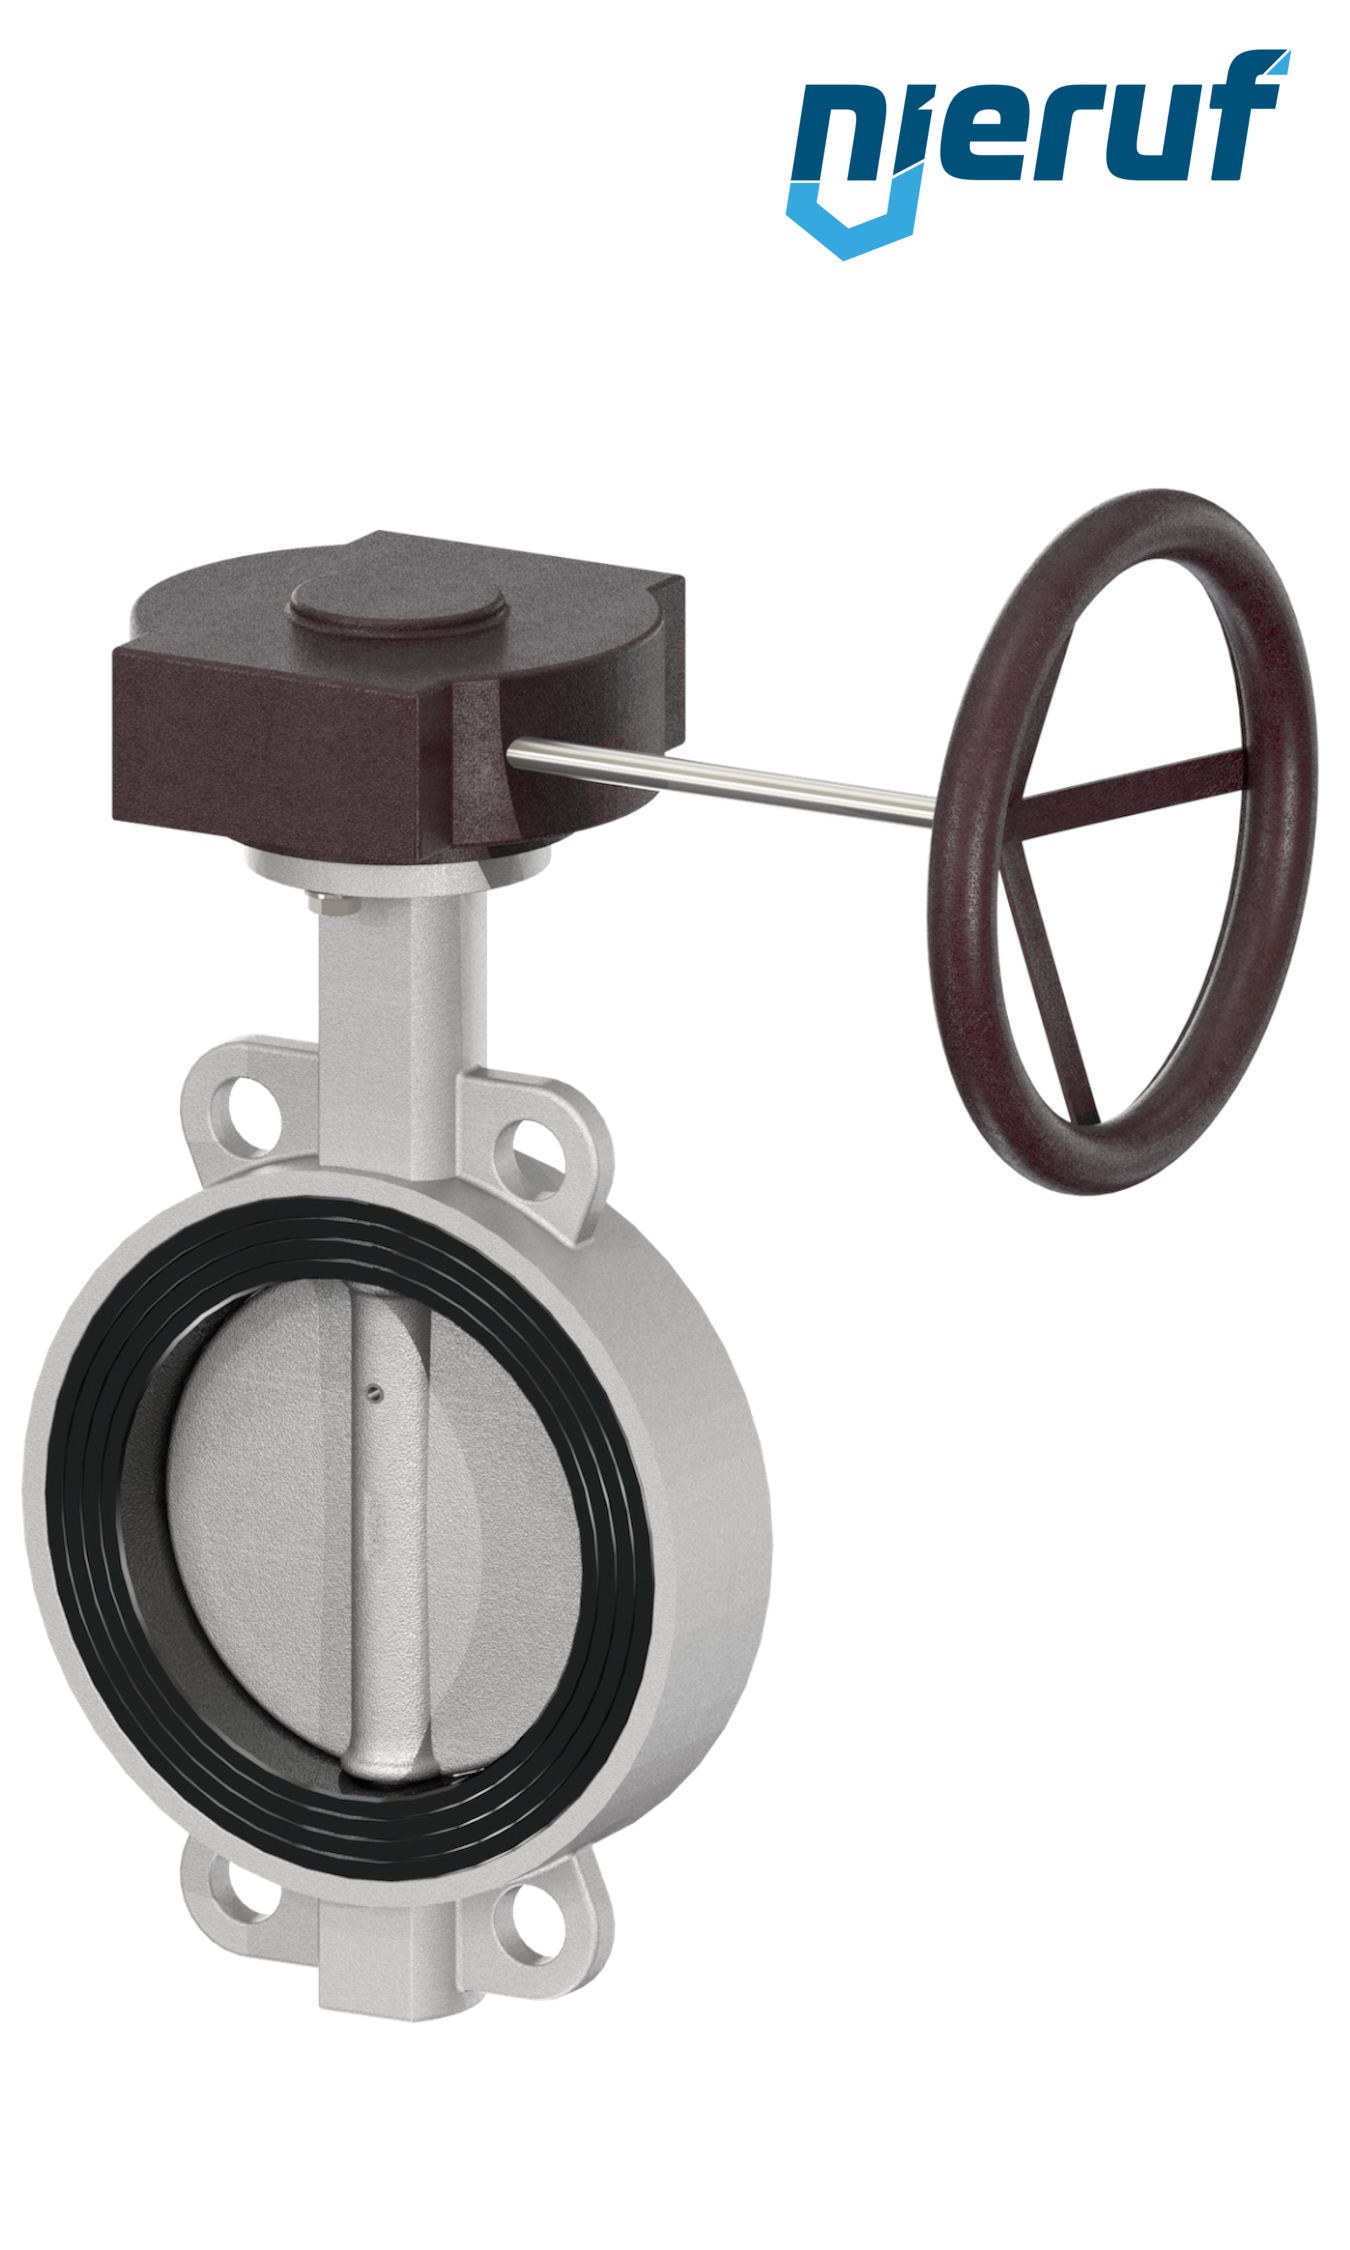 Butterfly-valve-stainless-steel DN 50 PN16 AK08 EPDM gearbox